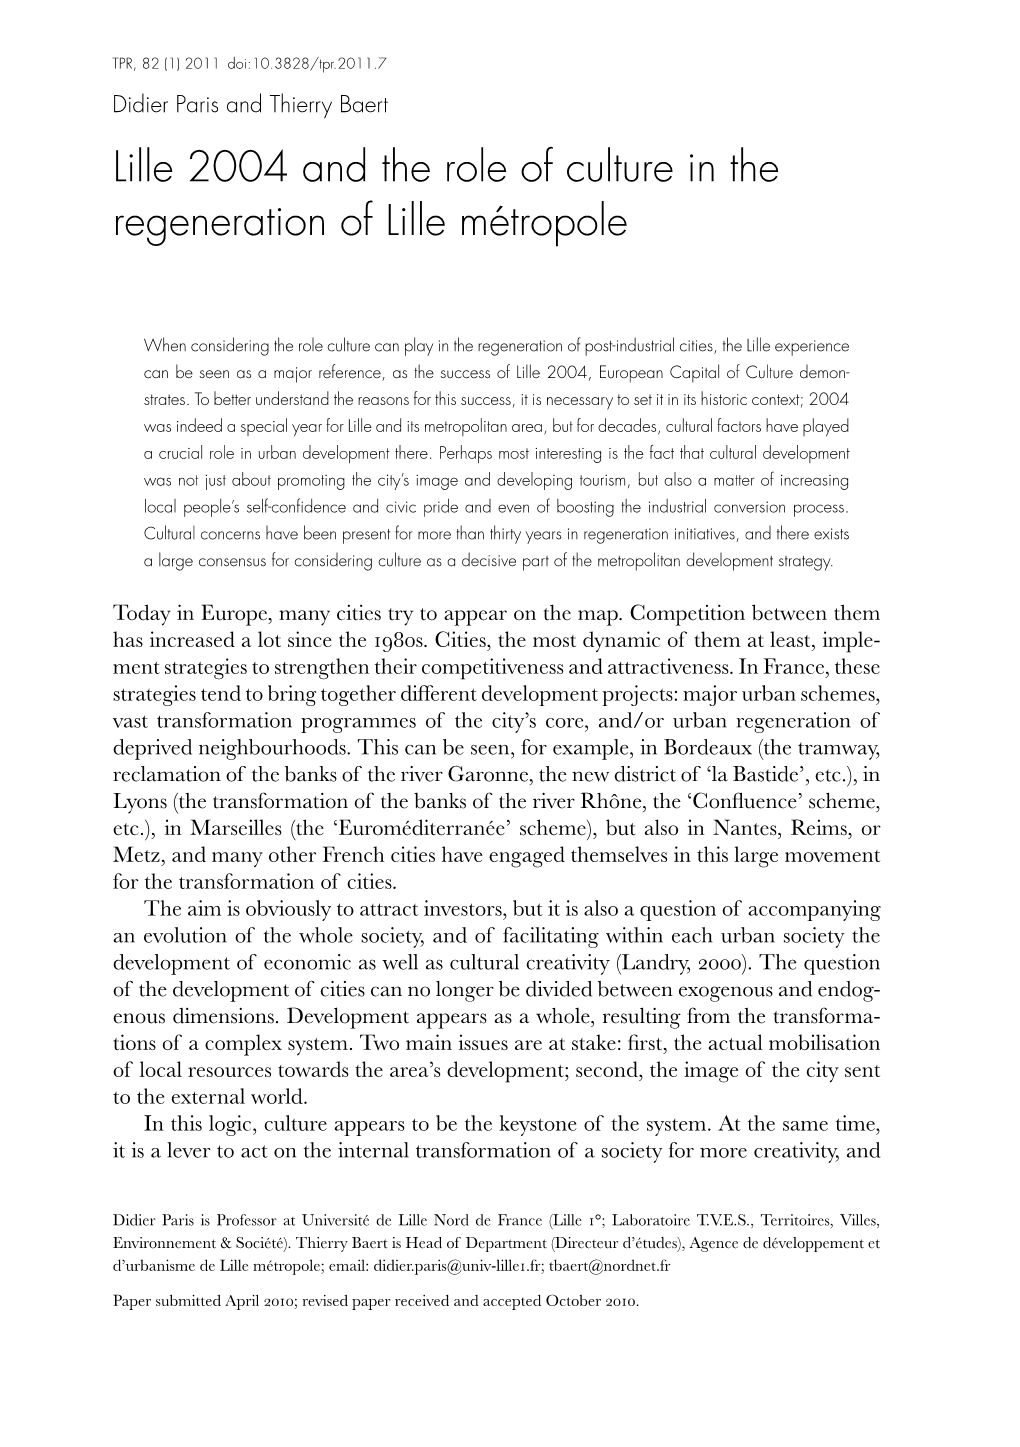 Lille 2004 and the Role of Culture in the Regeneration of Lille Métropole